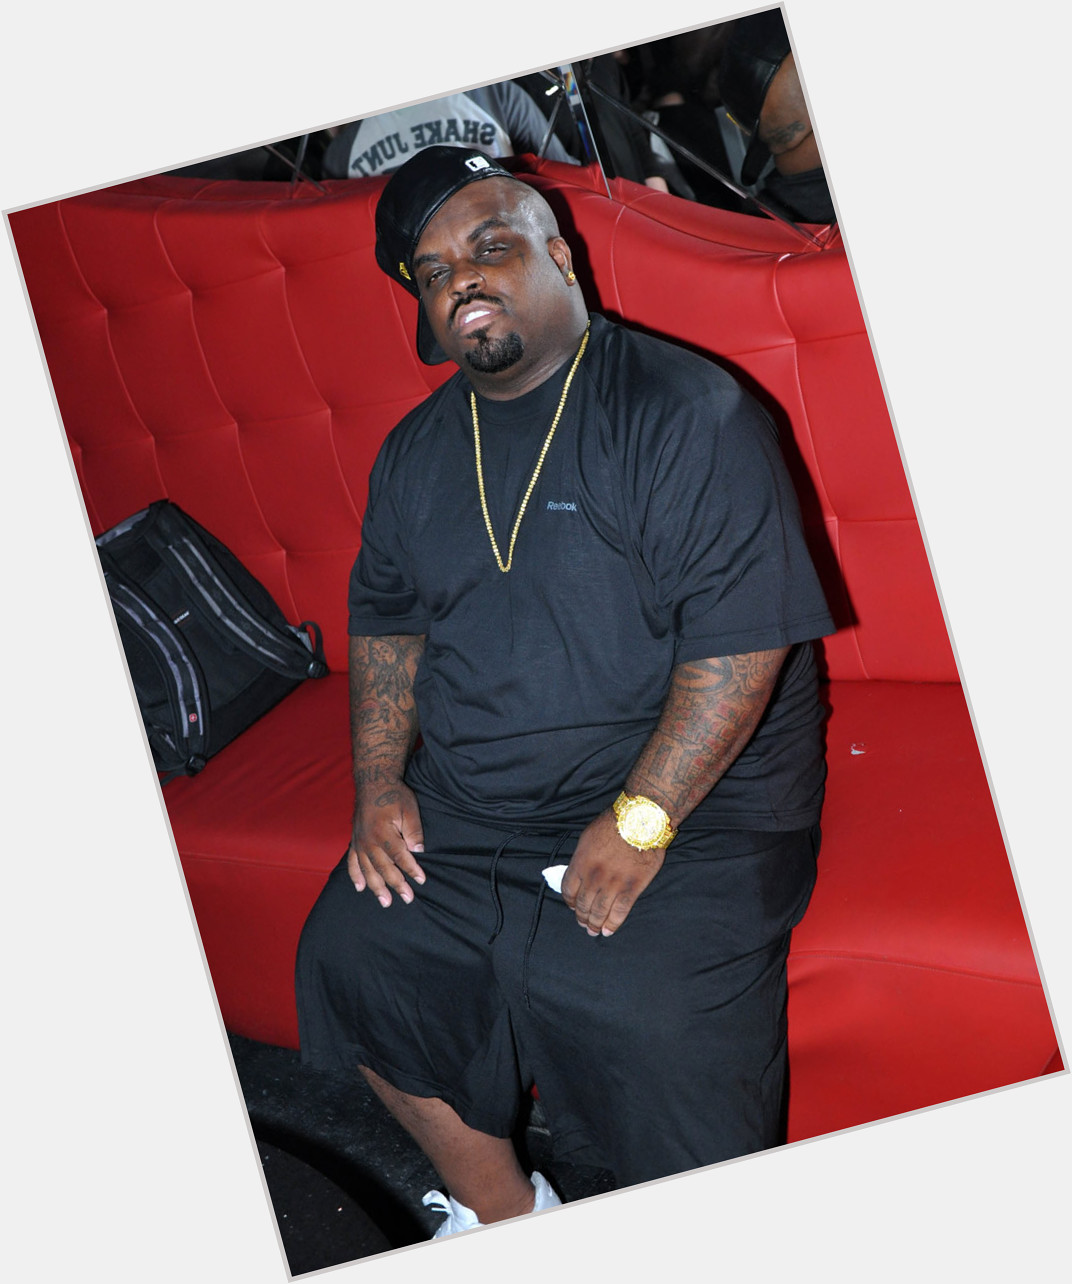 Cee Lo Green dating 2